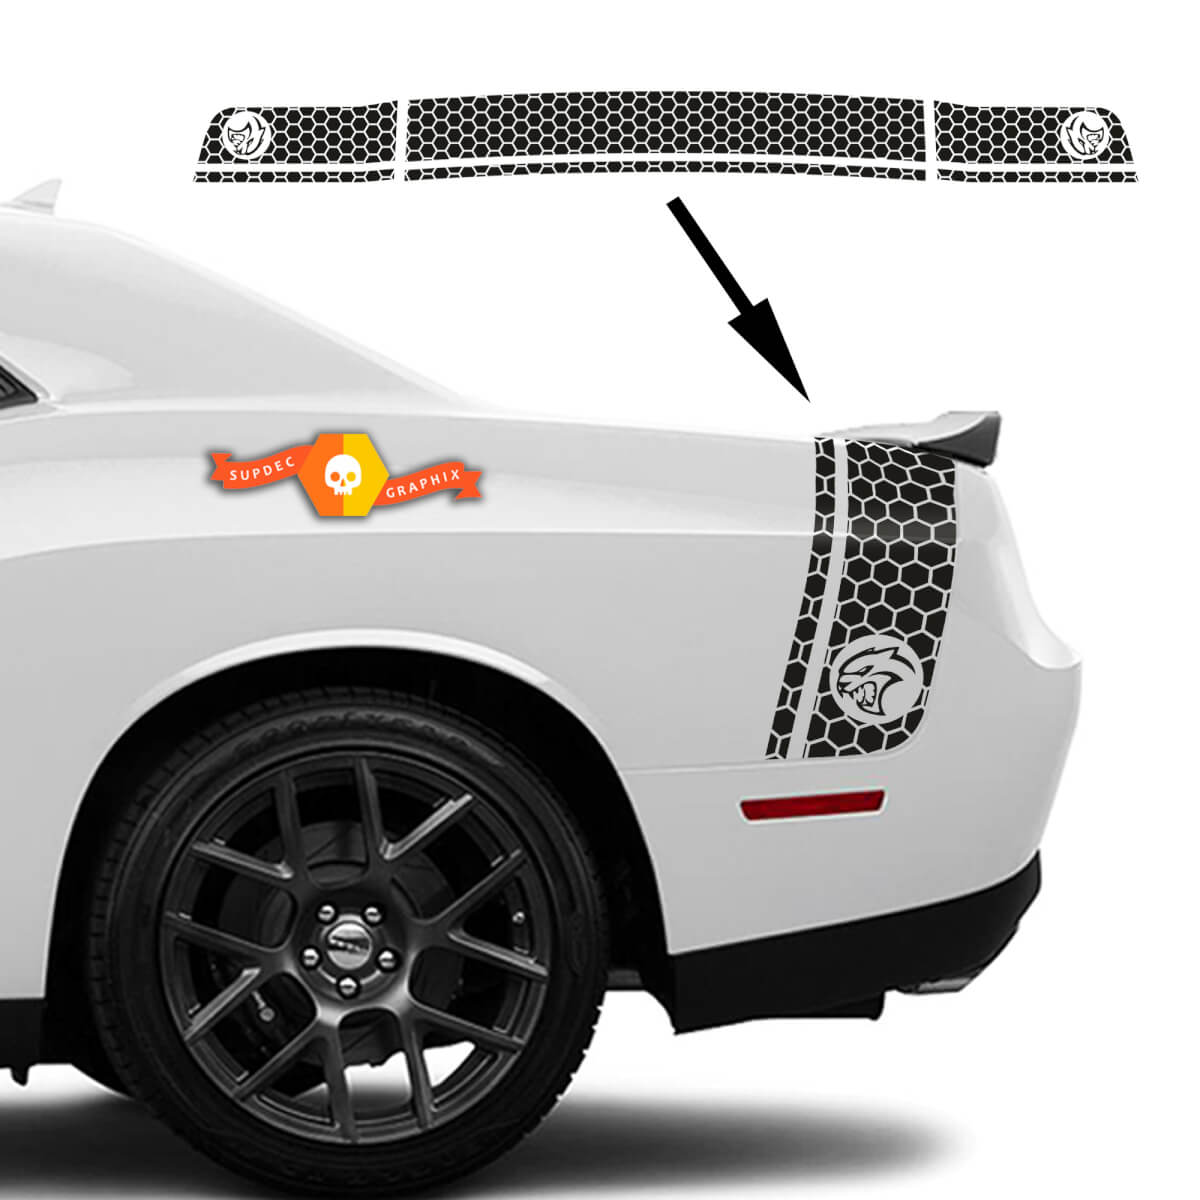 Dodge Challenger side and tail band Hellcat Honeycomb Decal Sticker graphics 